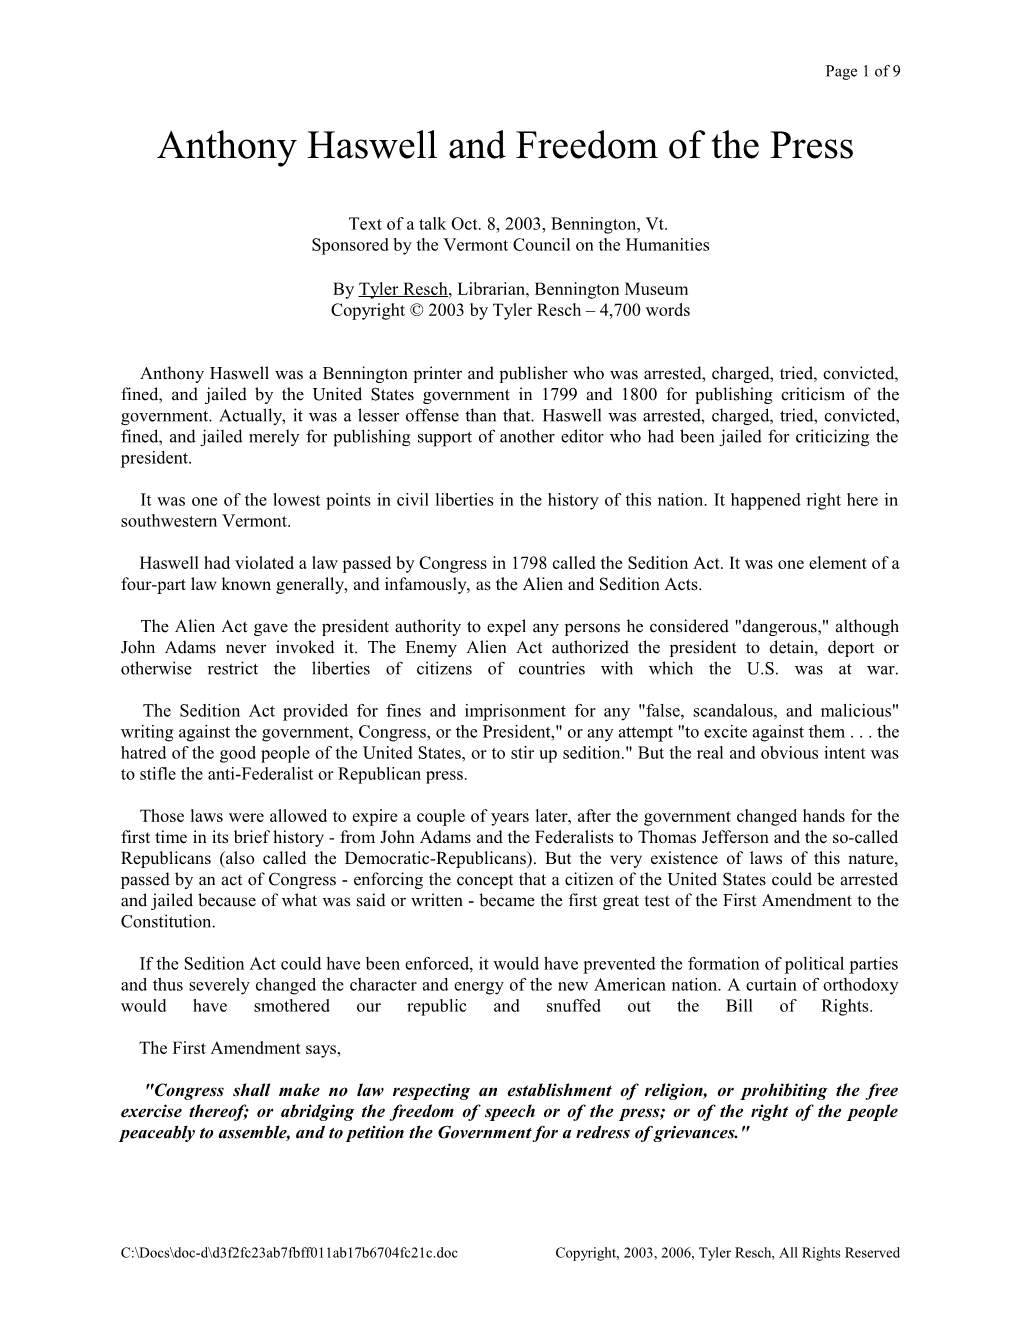 Anthony Haswell and Freedom of the Press